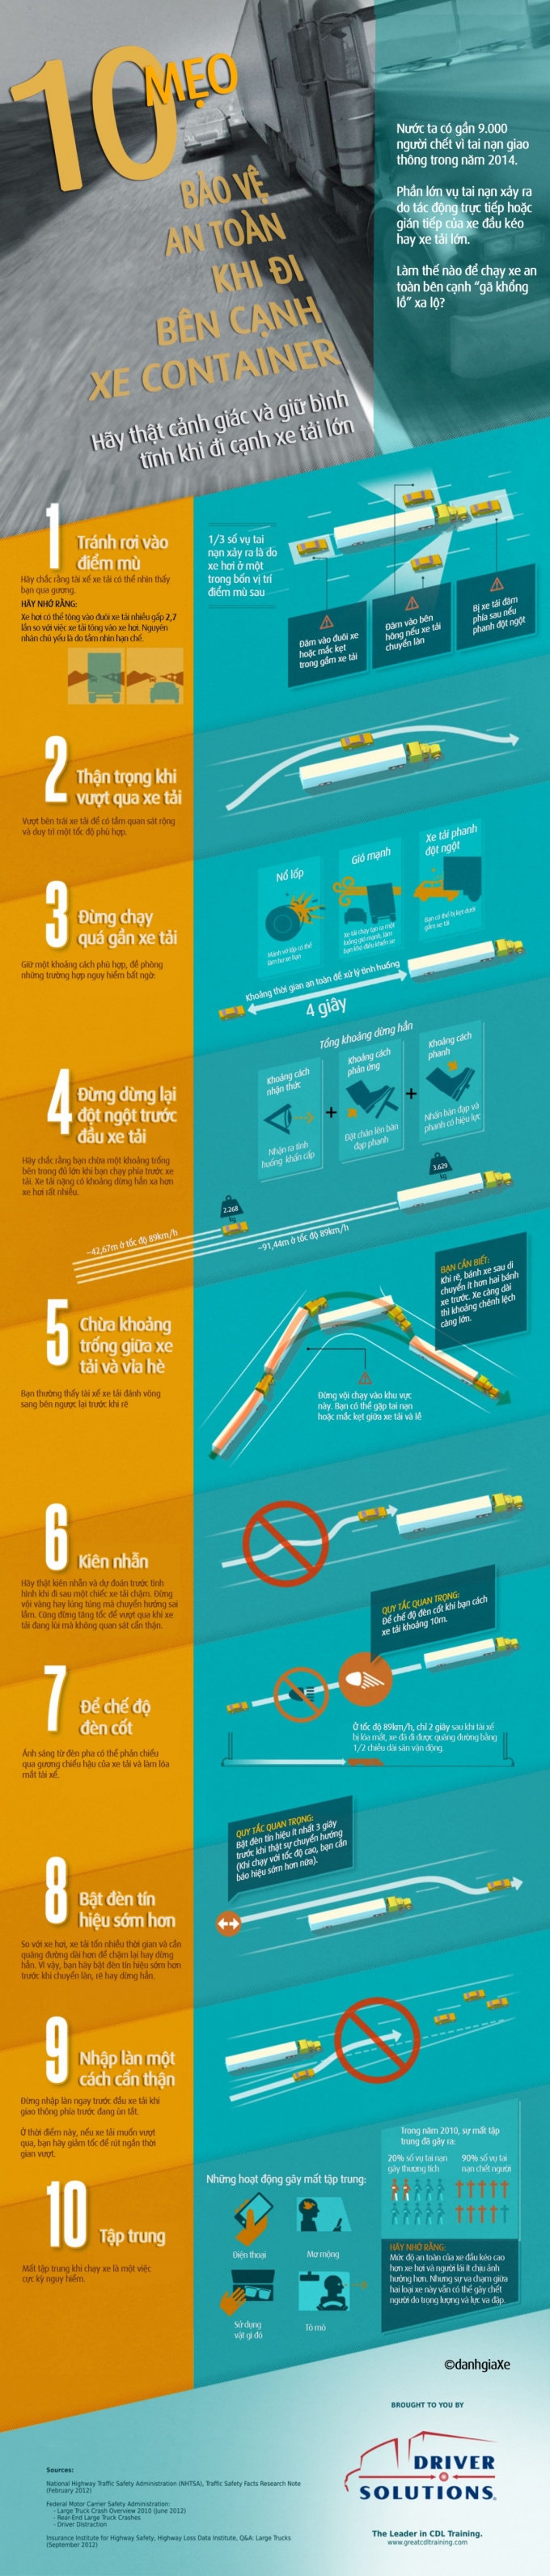 infographic-10-tips-for-sharing-the-road-with-truc